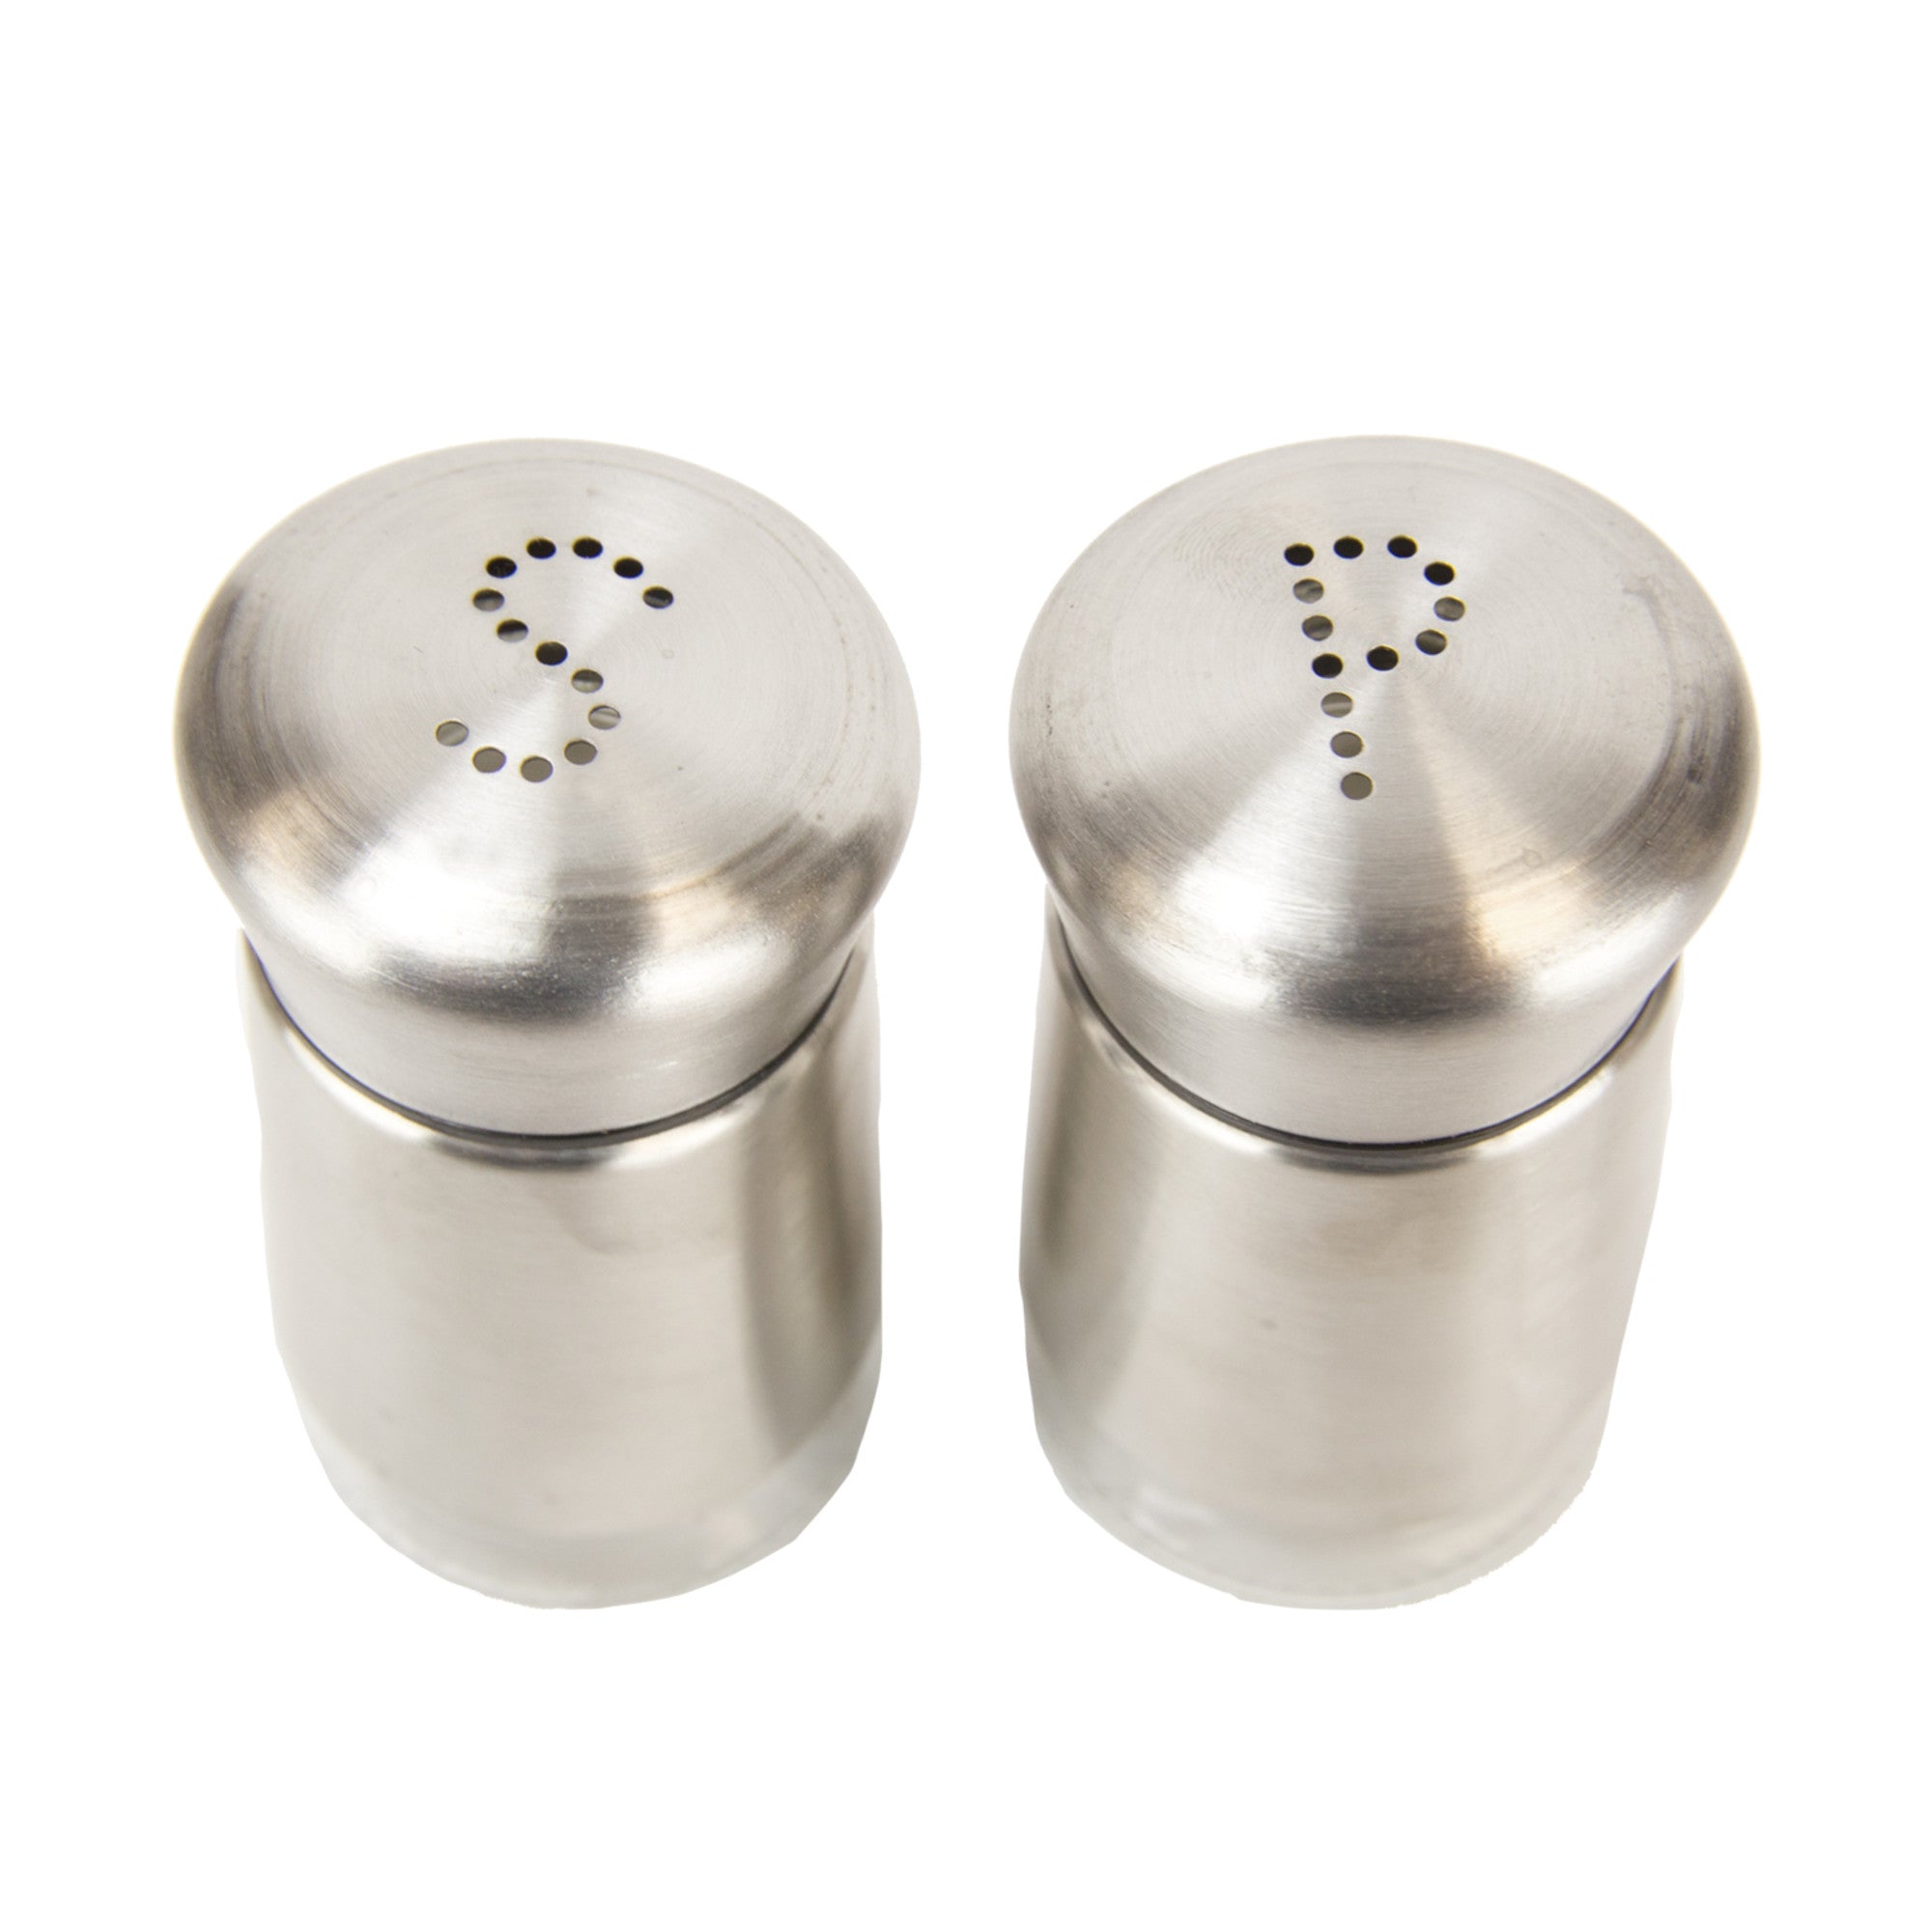 Home Basics Salt and Pepper Shakers, Silver - Silver